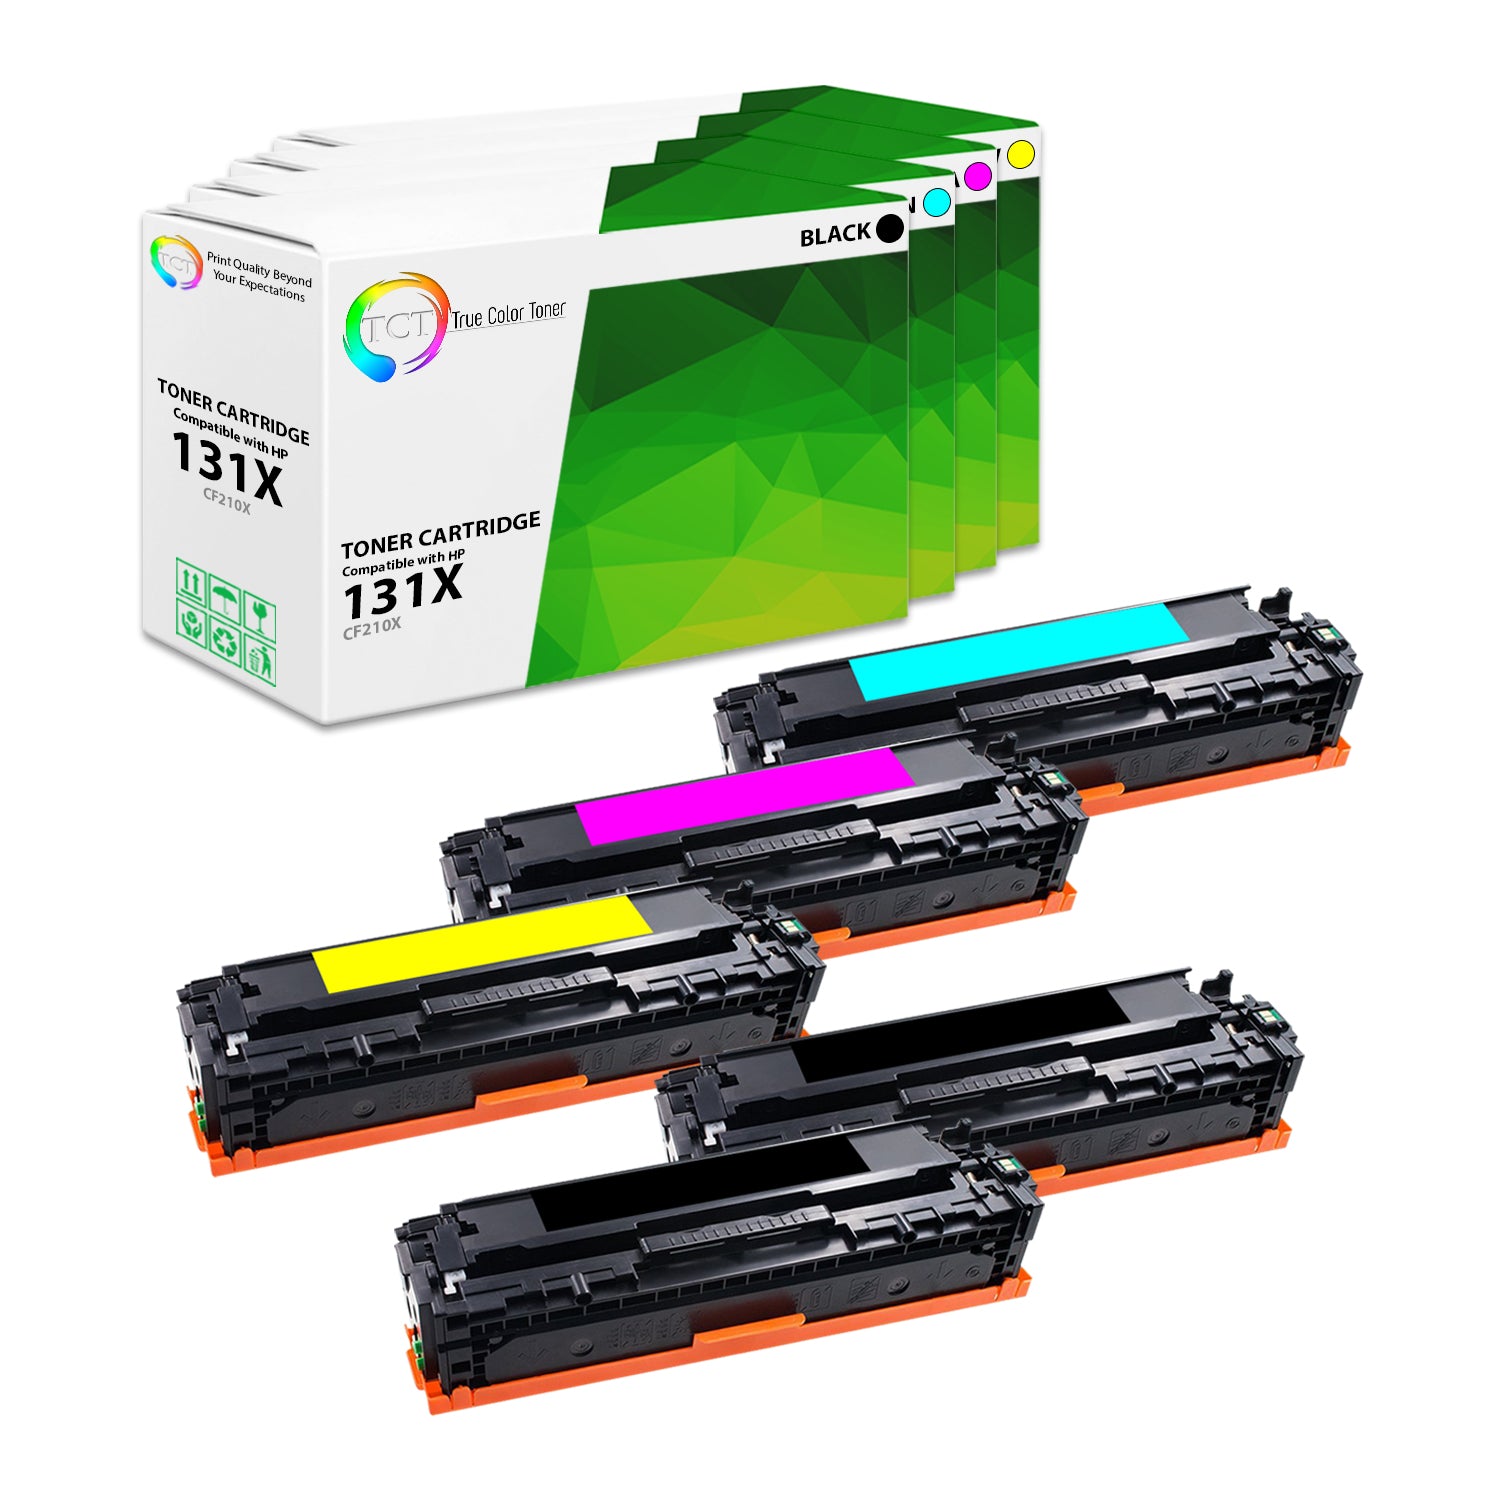 TCT Compatible High Yield Toner Cartridge Replacement for the HP 131X Series - 5 Pack (BK, C, M, Y)